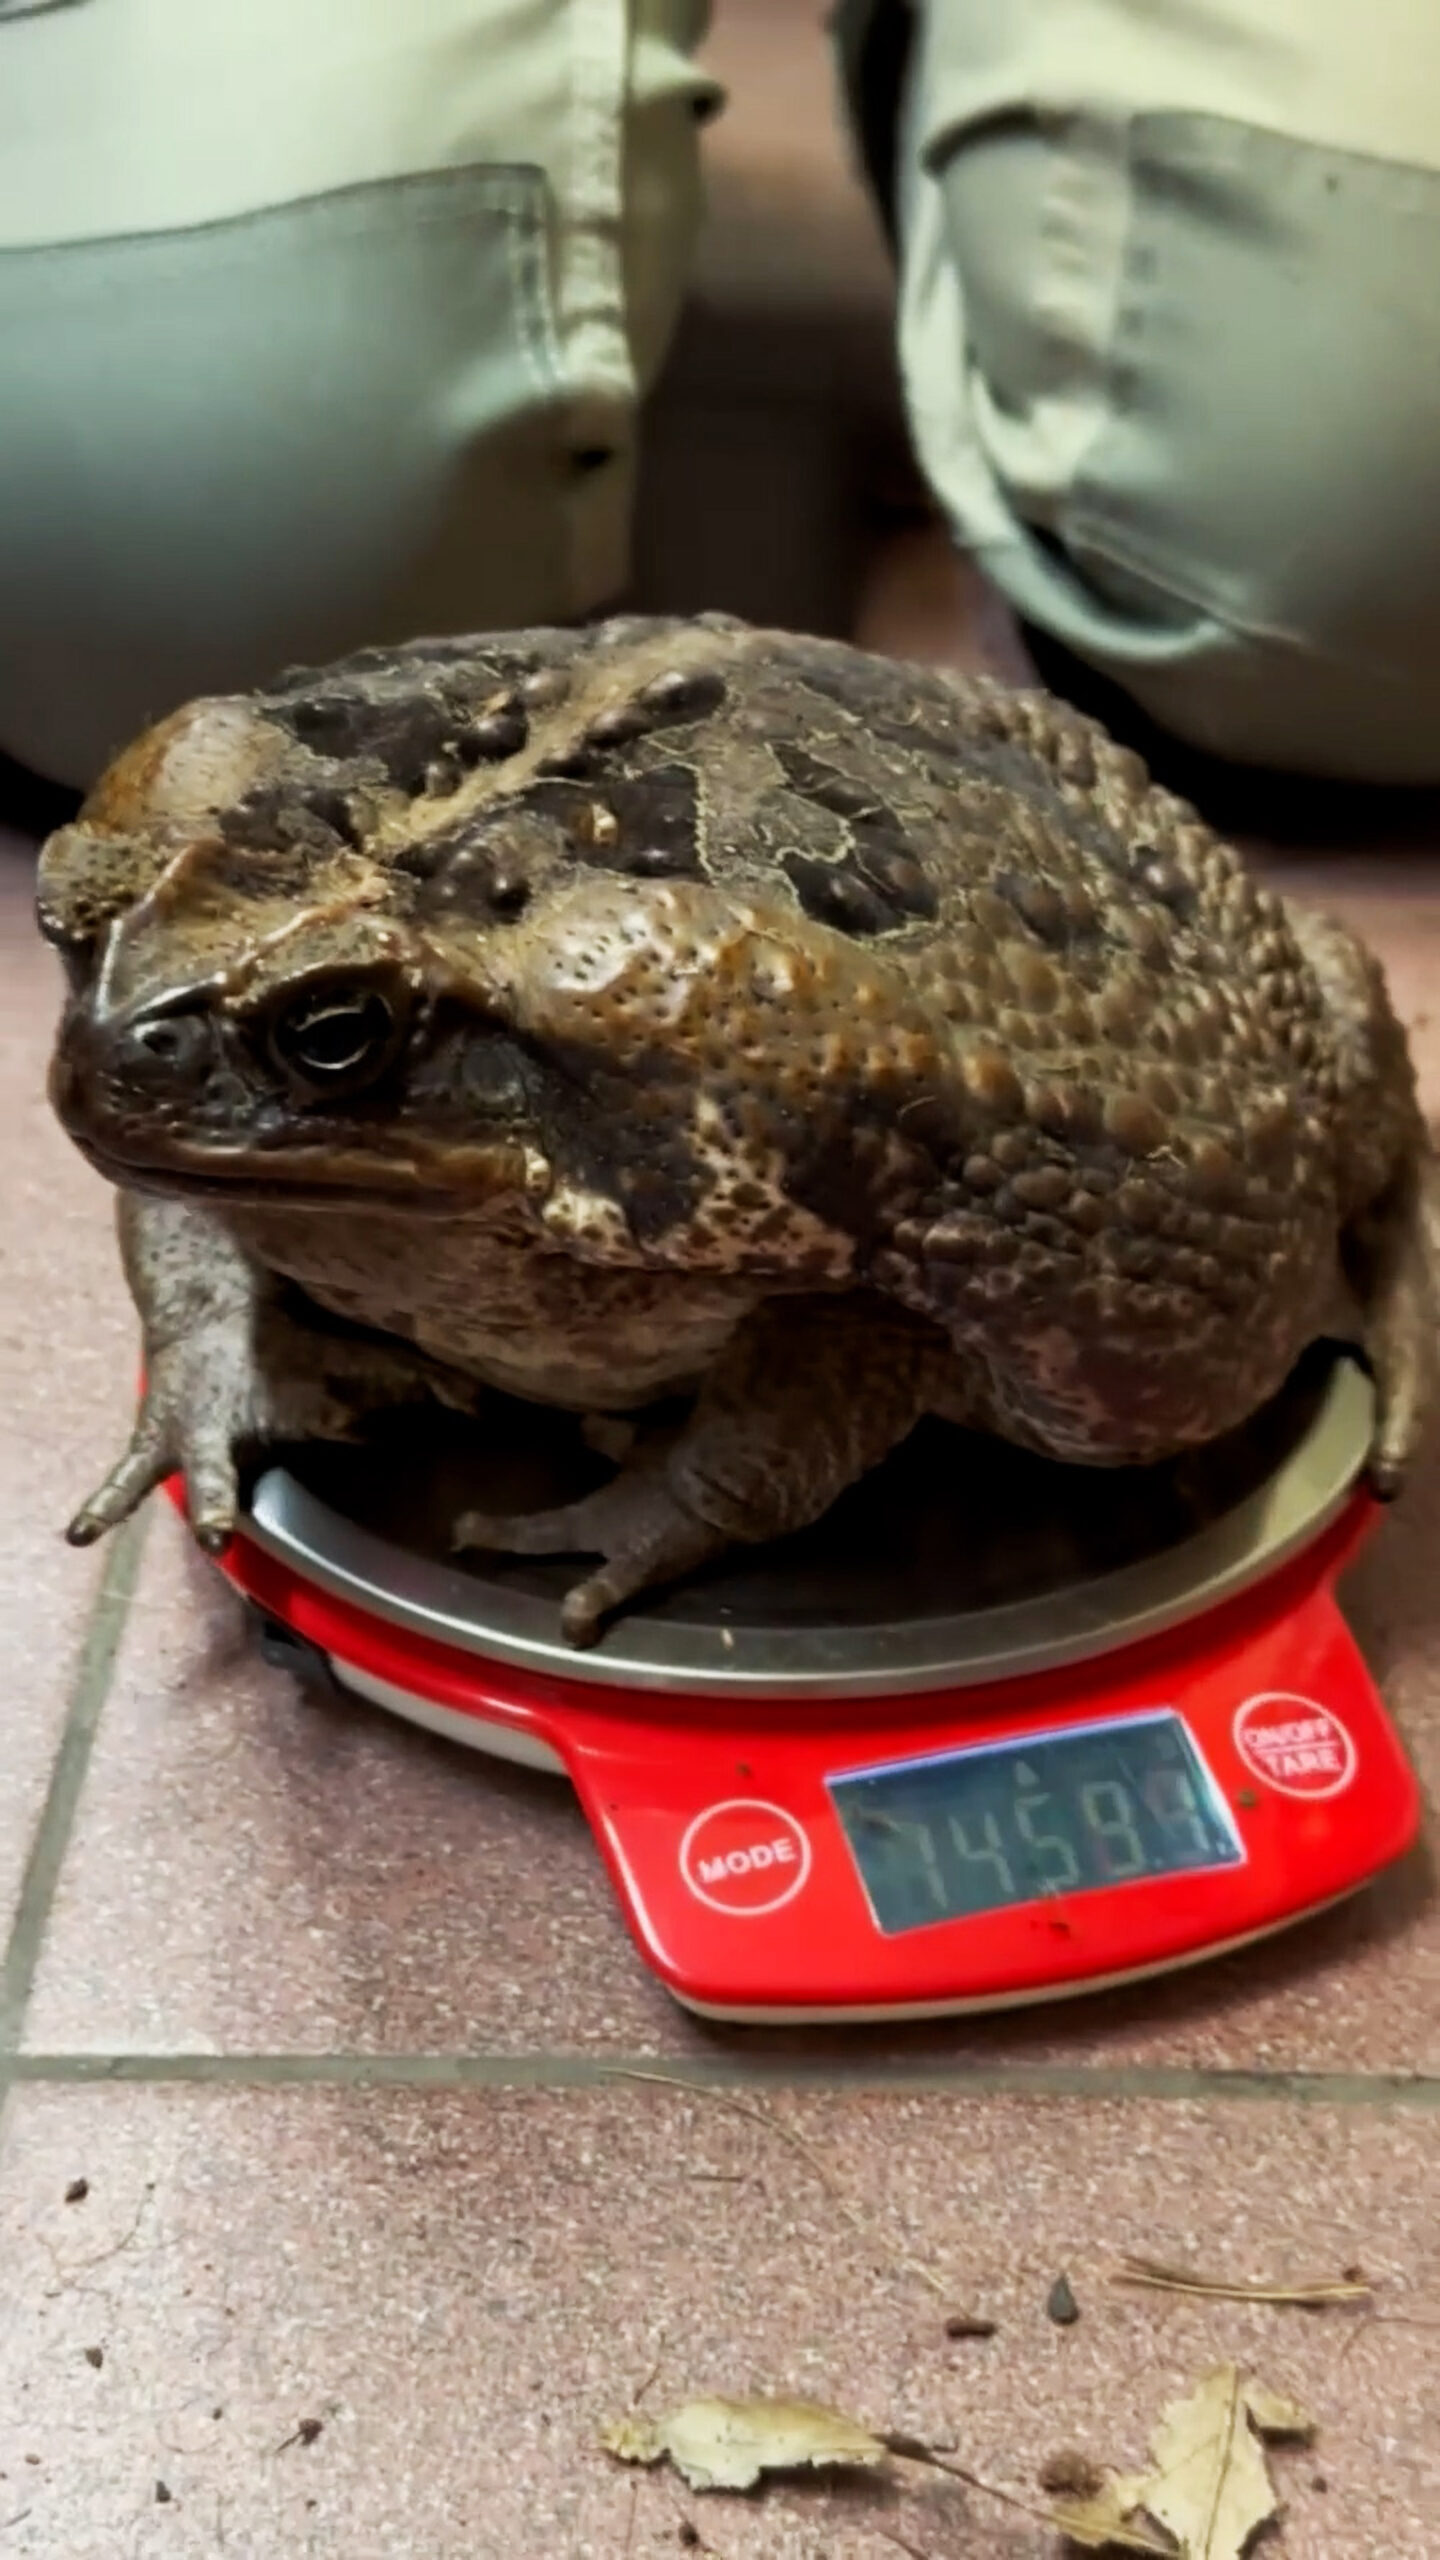 Read more about the article Massive Cane Toad Has Weigh To Go